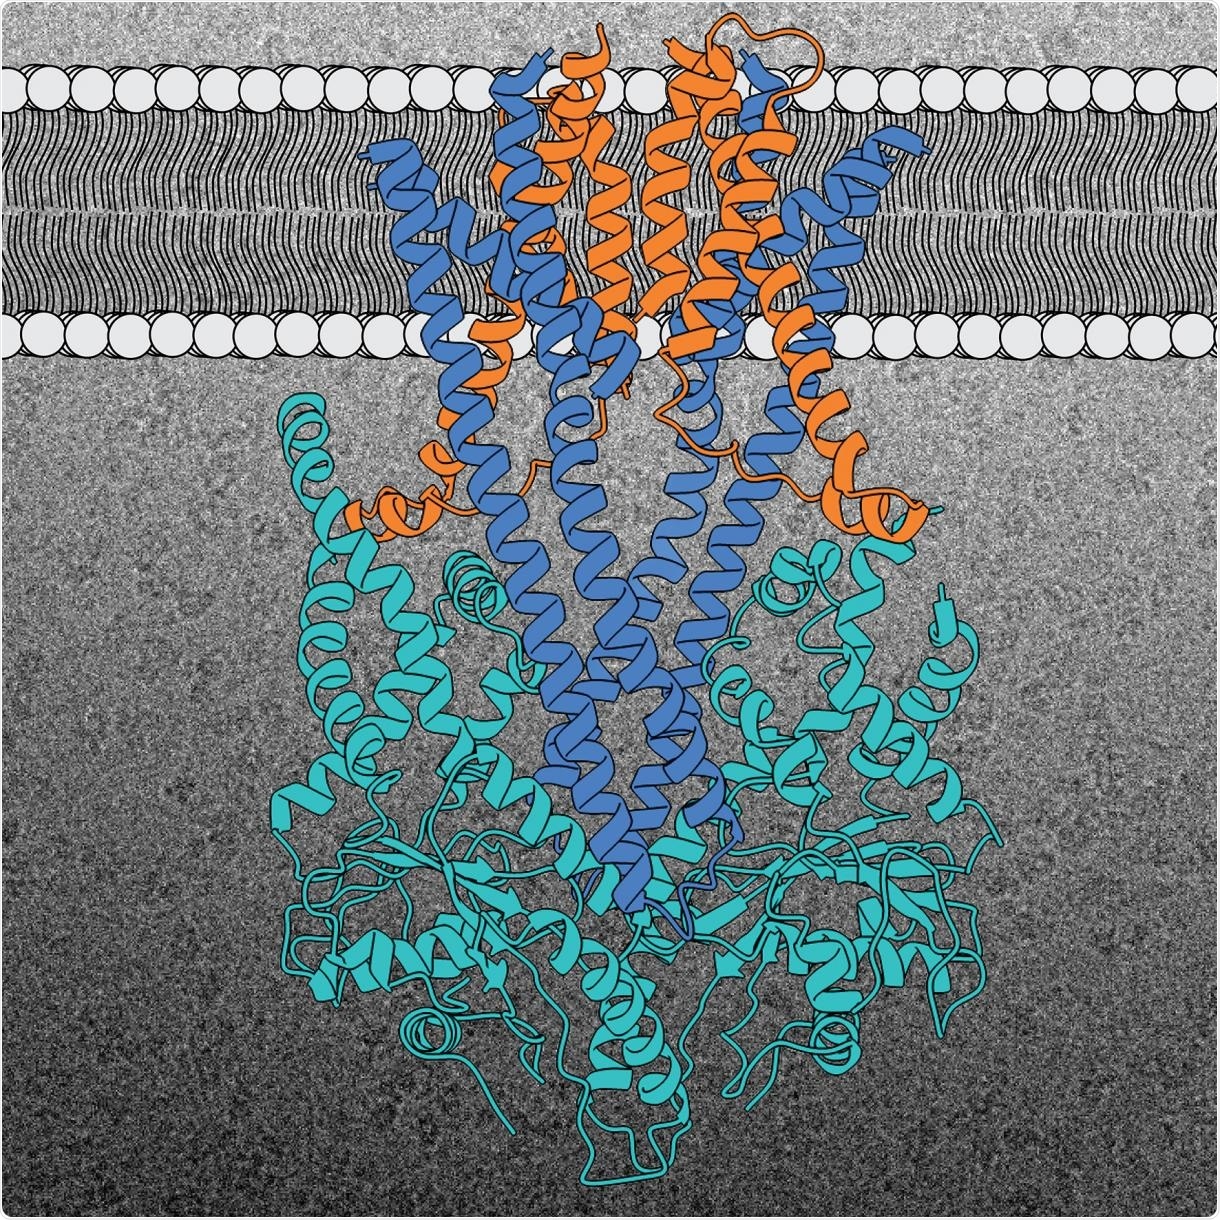 Researchers determine 3D structure of molecular machine involved in placement of key proteins